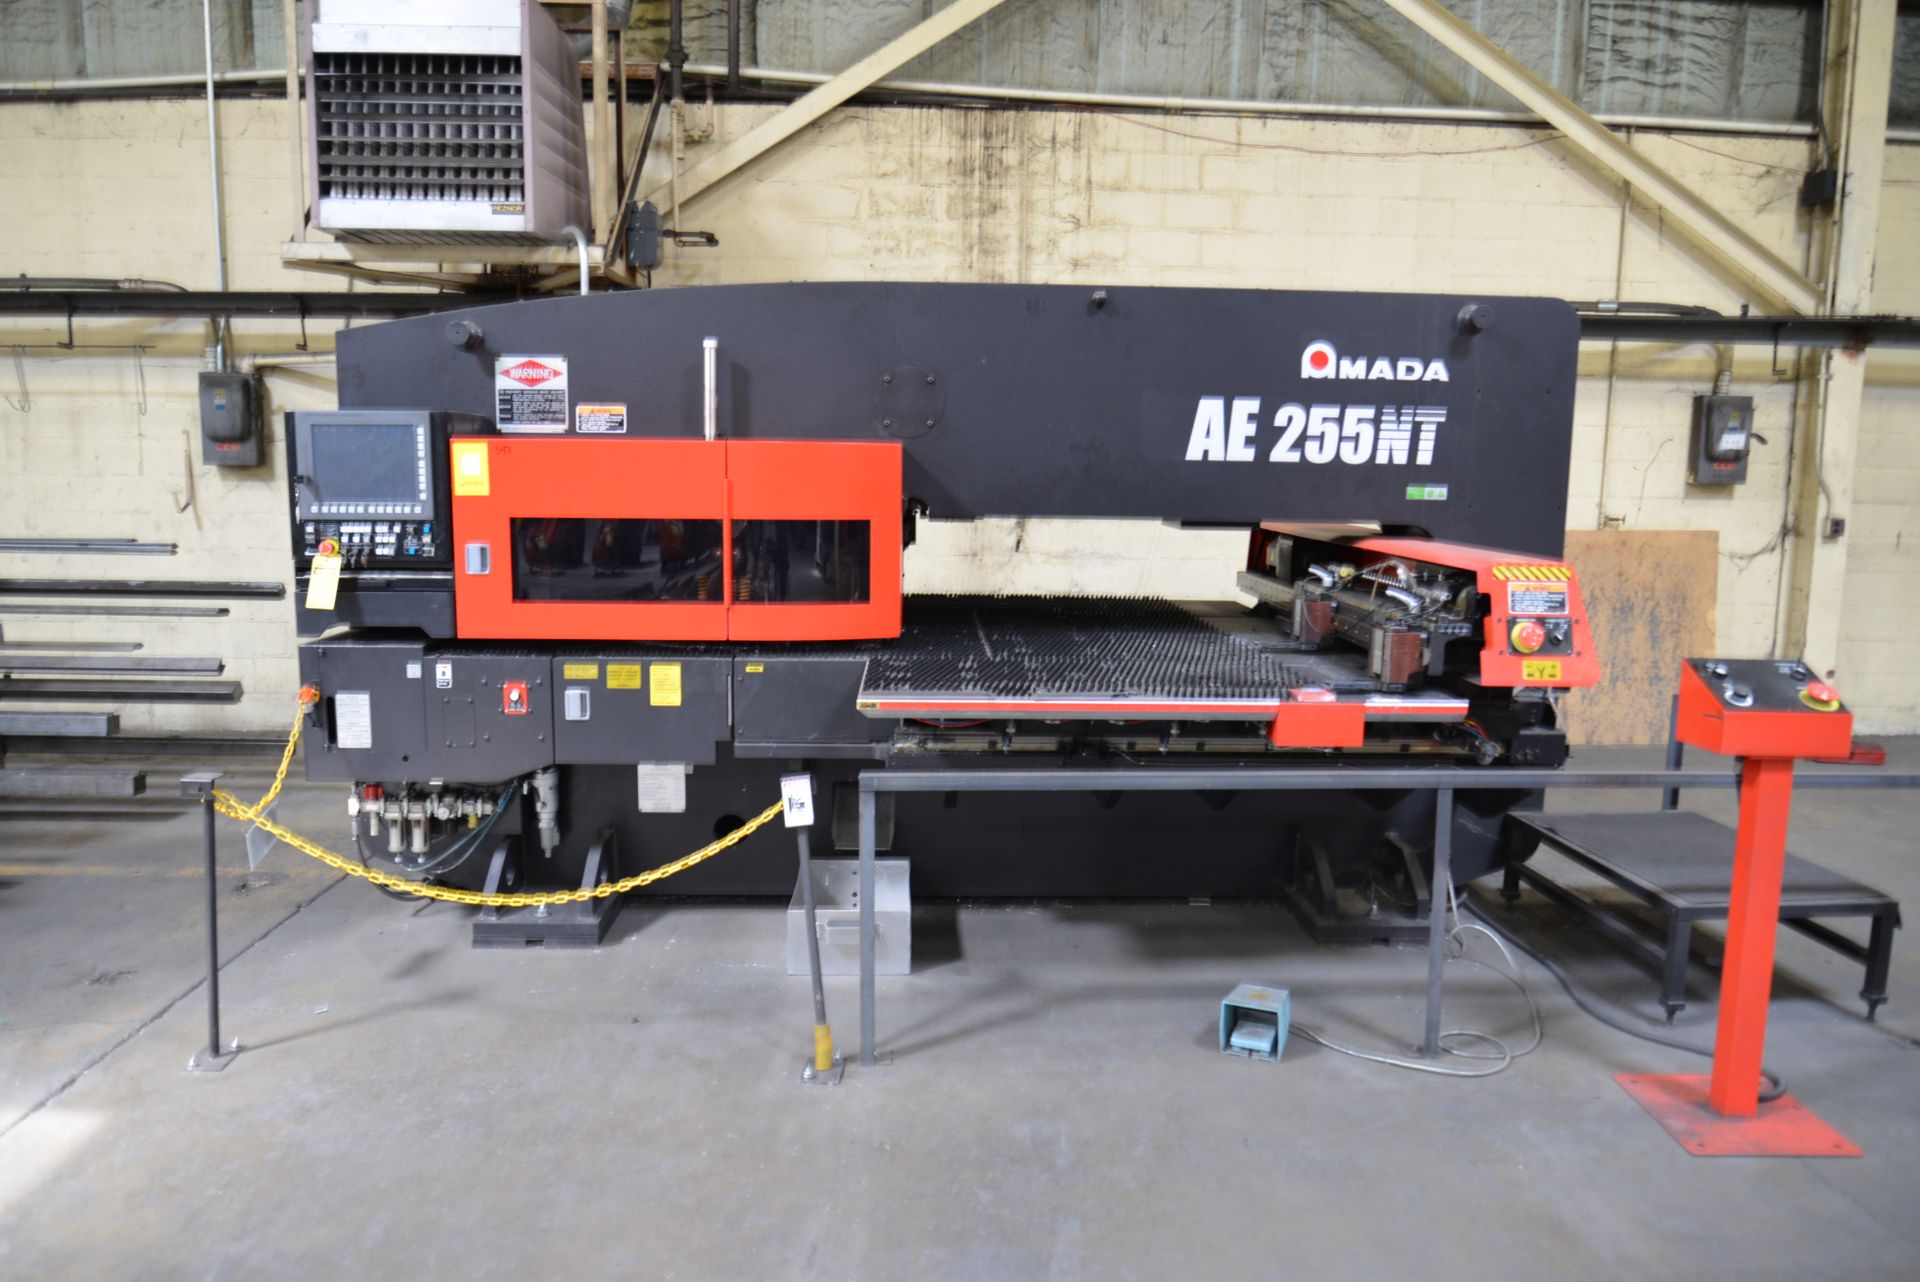 2013 AMADA AE255NT TURRET PUNCH; CAP/FORCE 200 KN, 45 TURRET STATIONS, POWER REQUIREMENT 19 KVA, - Image 2 of 4